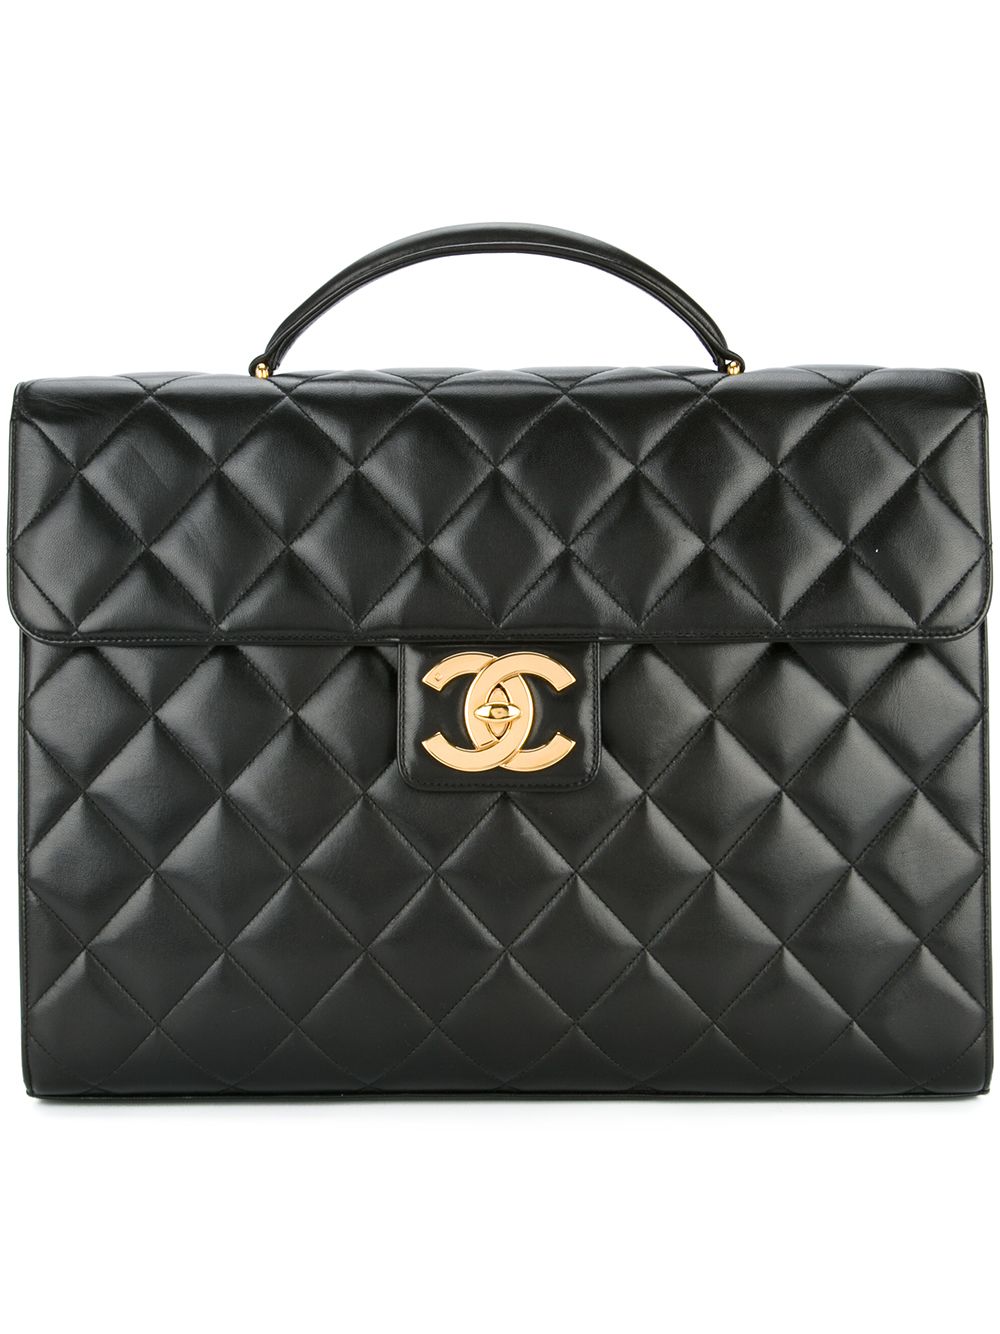 Chanel Black Quilted Leather CC Zip Around Wallet Chanel